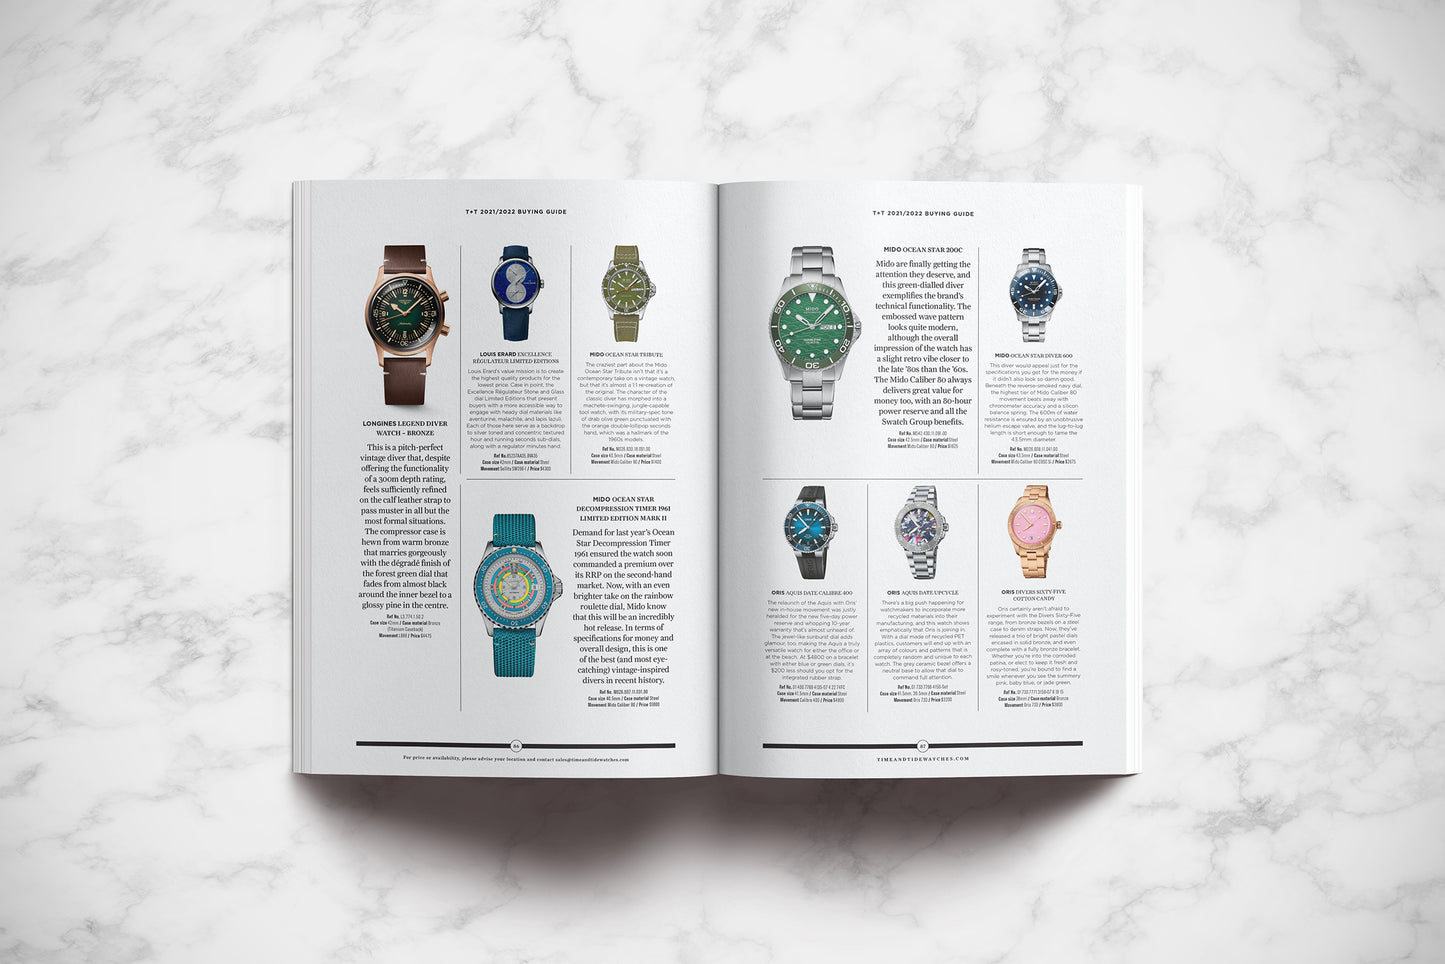 Time+Tide Watches - NOW Magazine - The Watch Buying Guide - Issue 4